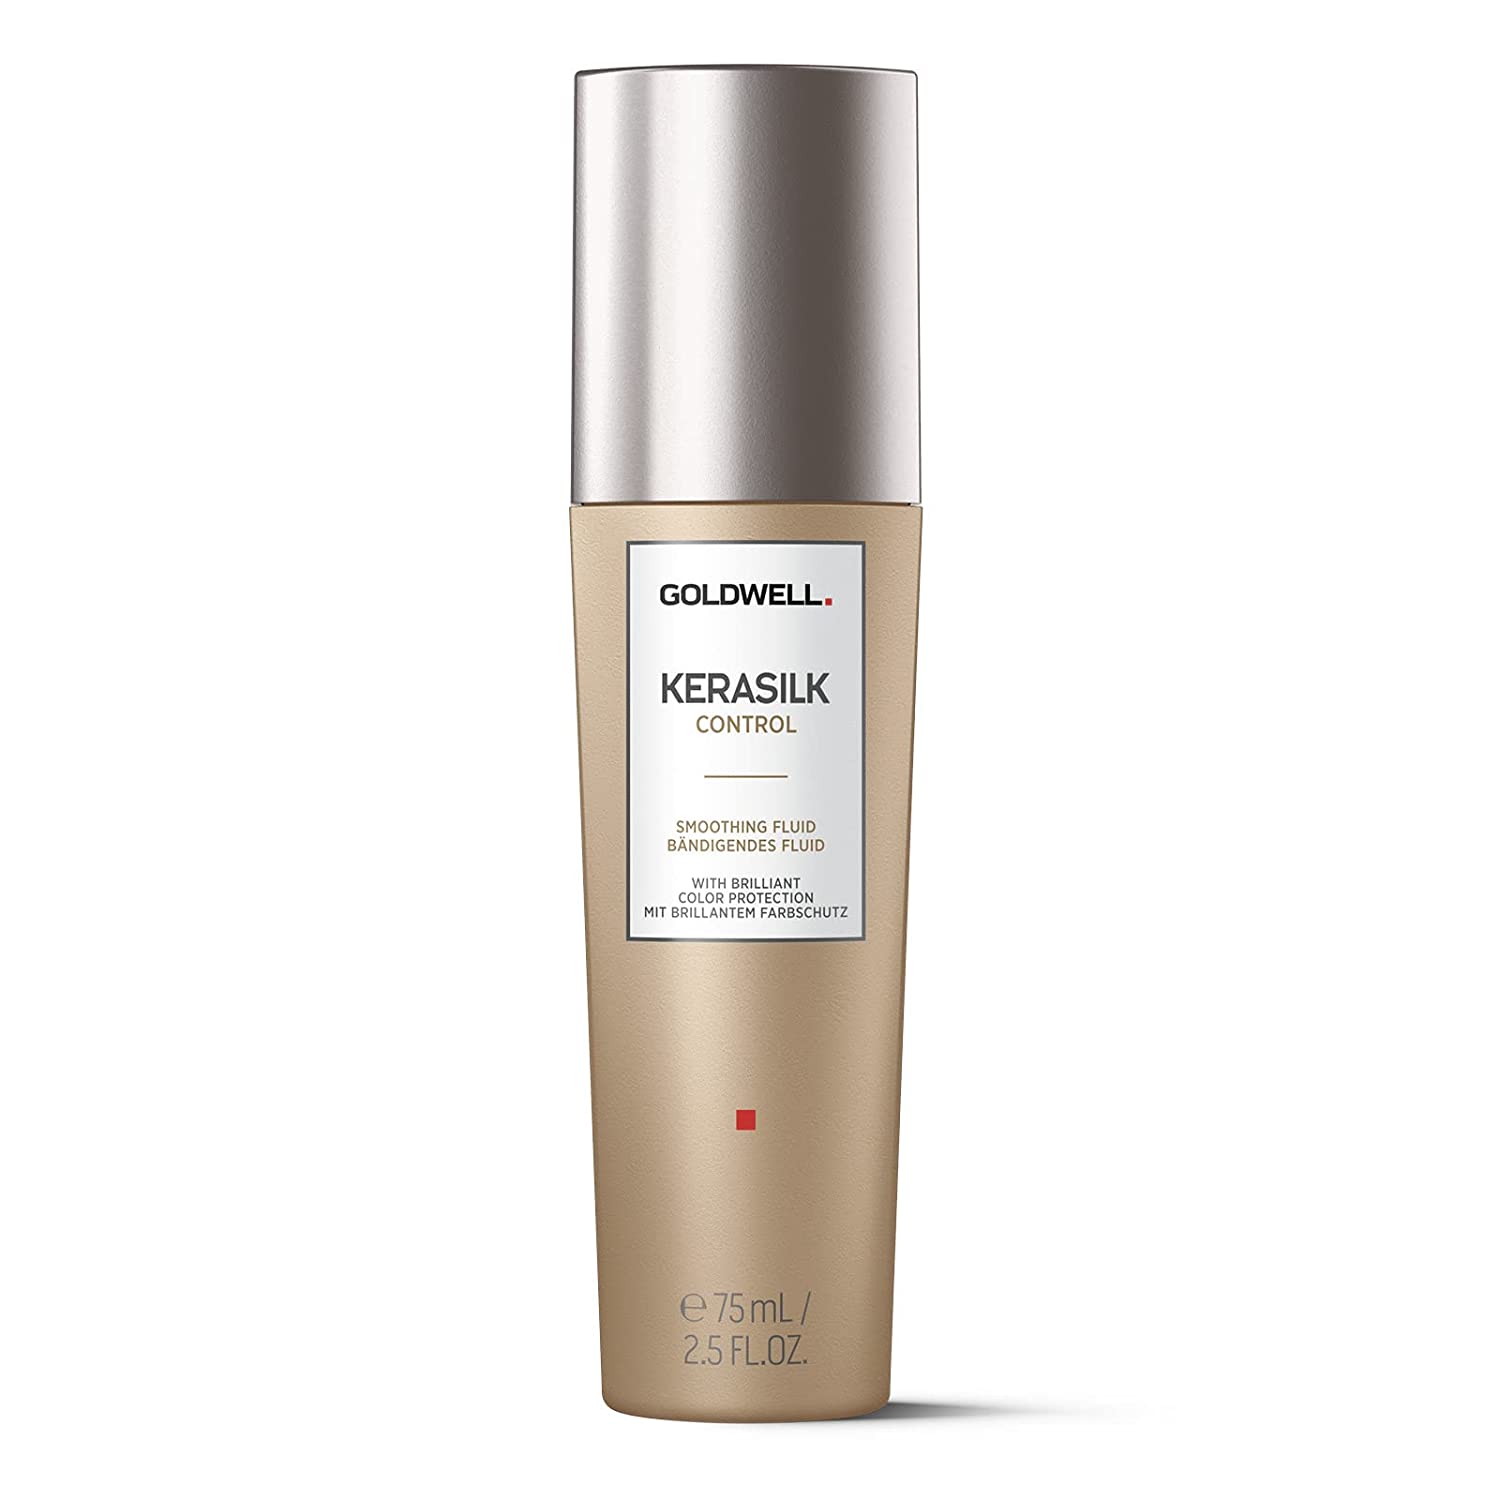 Goldwell Kerasilk Control Taming Fluid for Unruly and Frizzy Hair, 75 ml